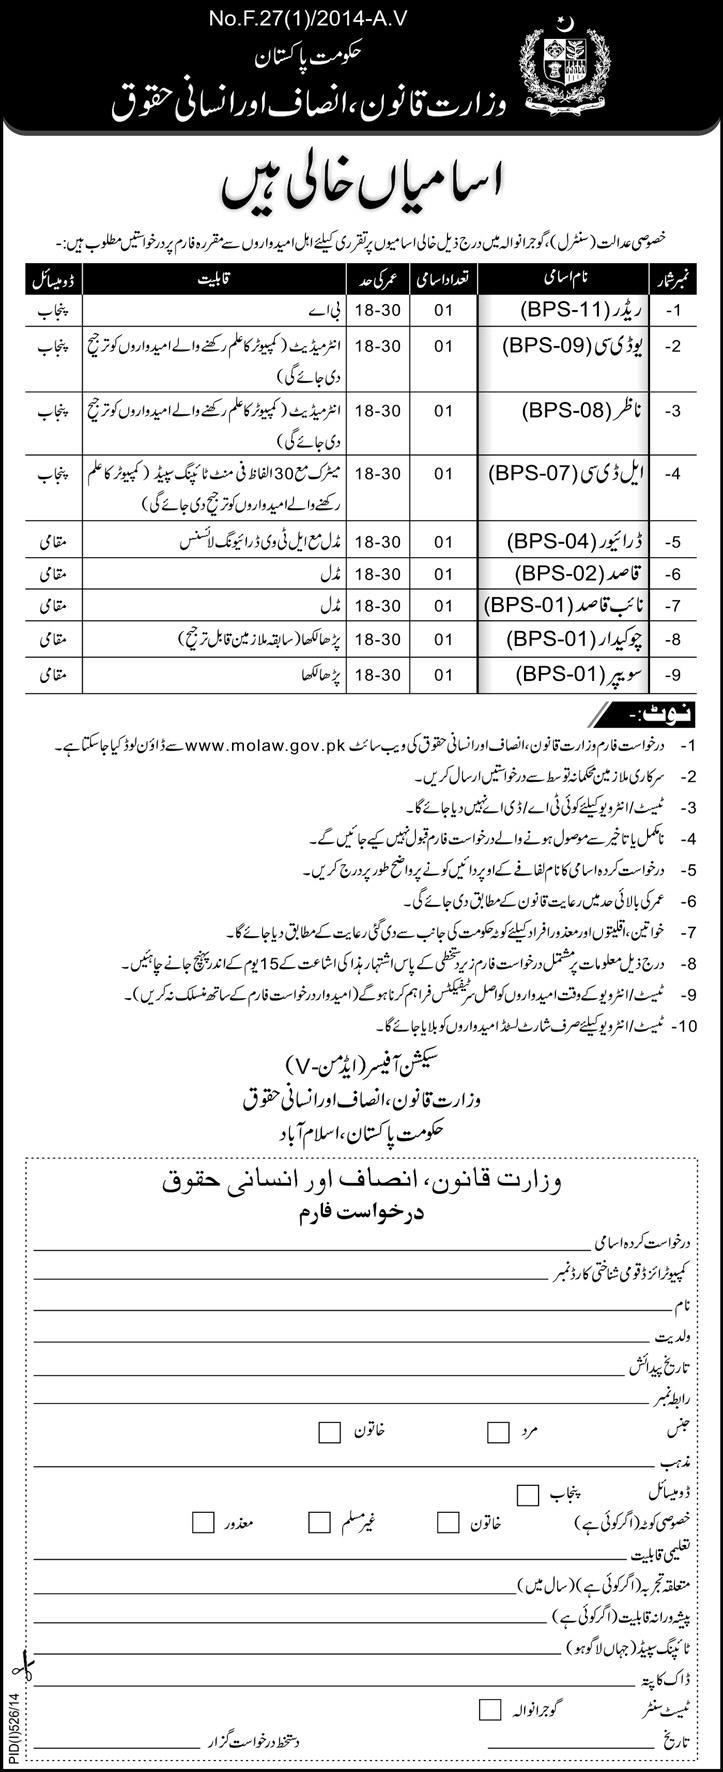 Ministry of Law Justice & Human Rights Pakistan Jobs 2014 August Application Form